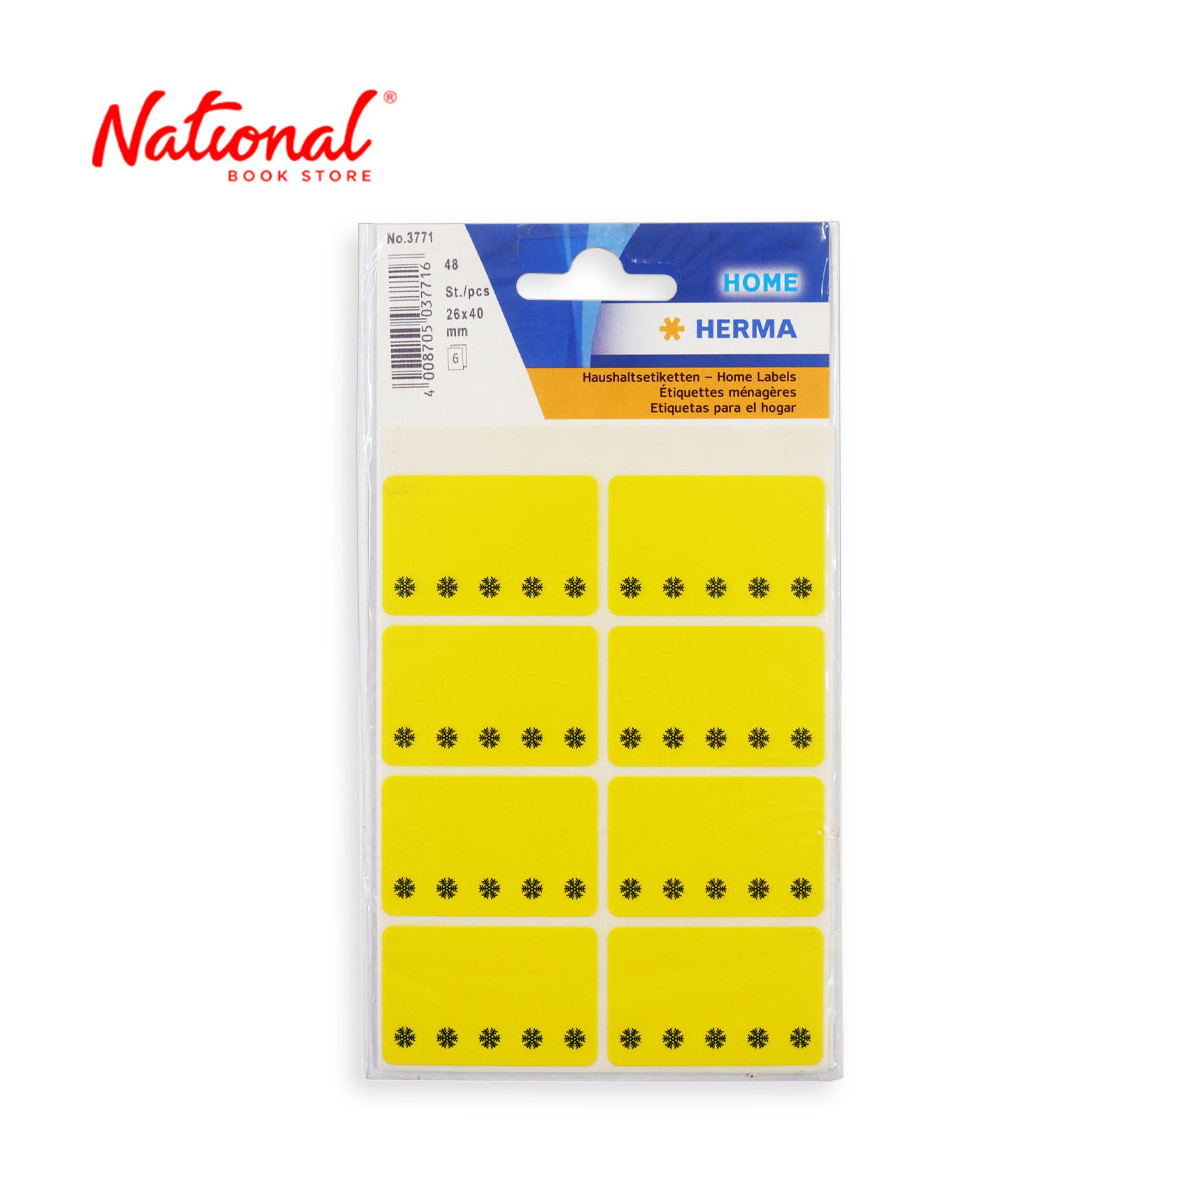 Herma Label Sticker 3770 6 sheets 48's Labels Deep Freeze, Yellow - Stationery - Filing Accessories